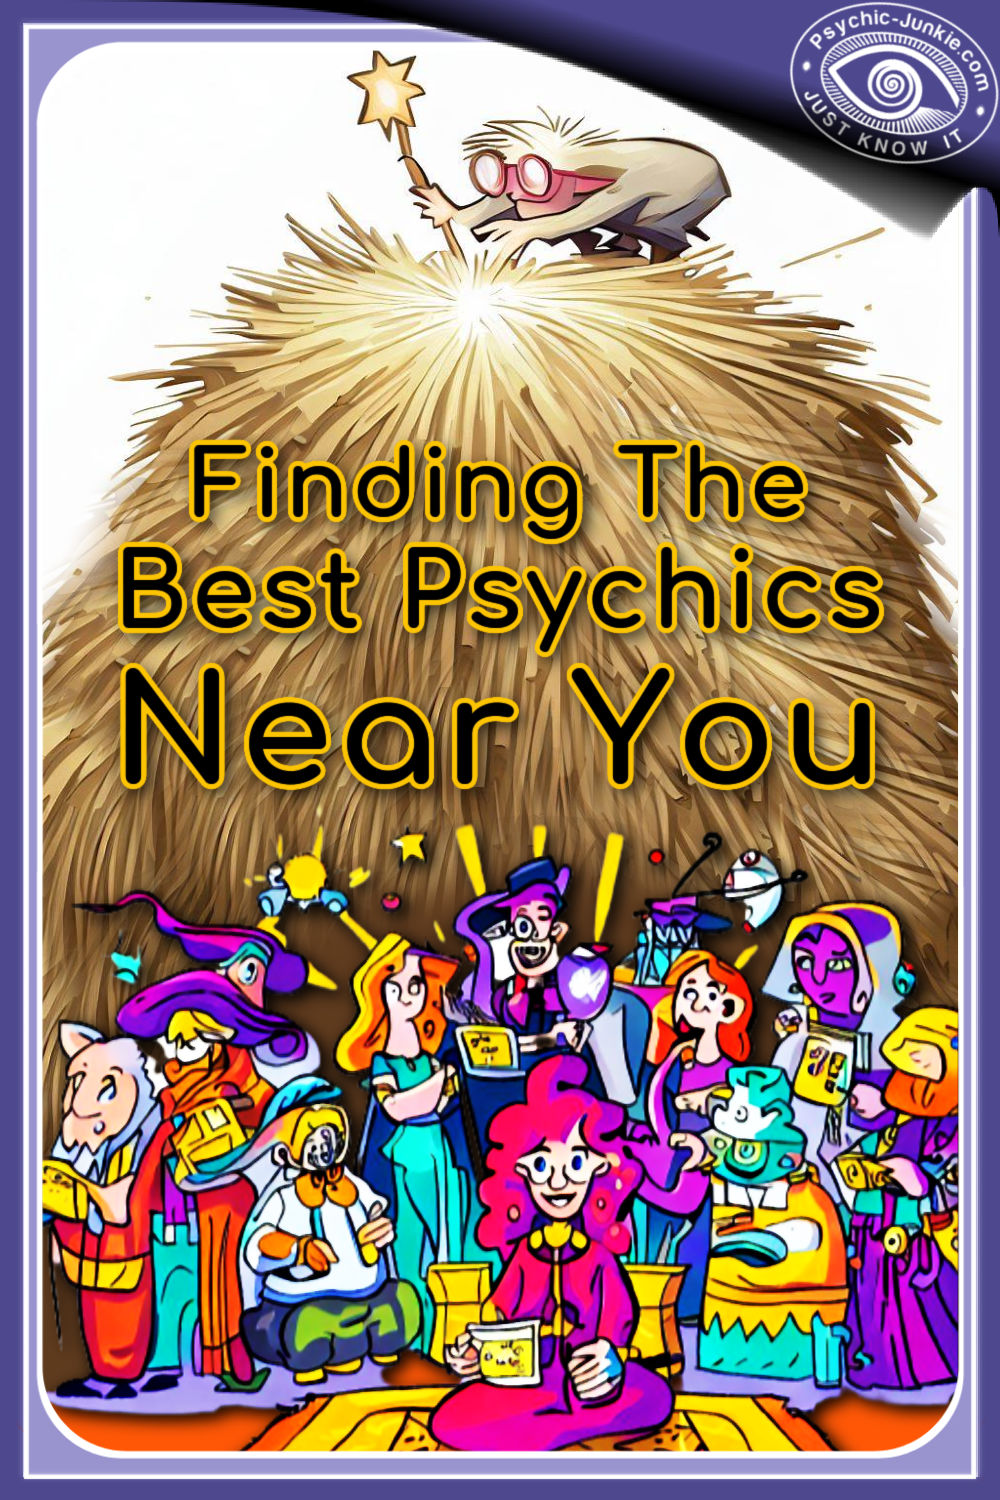 How Can I Find The Best Psychics Near Me?